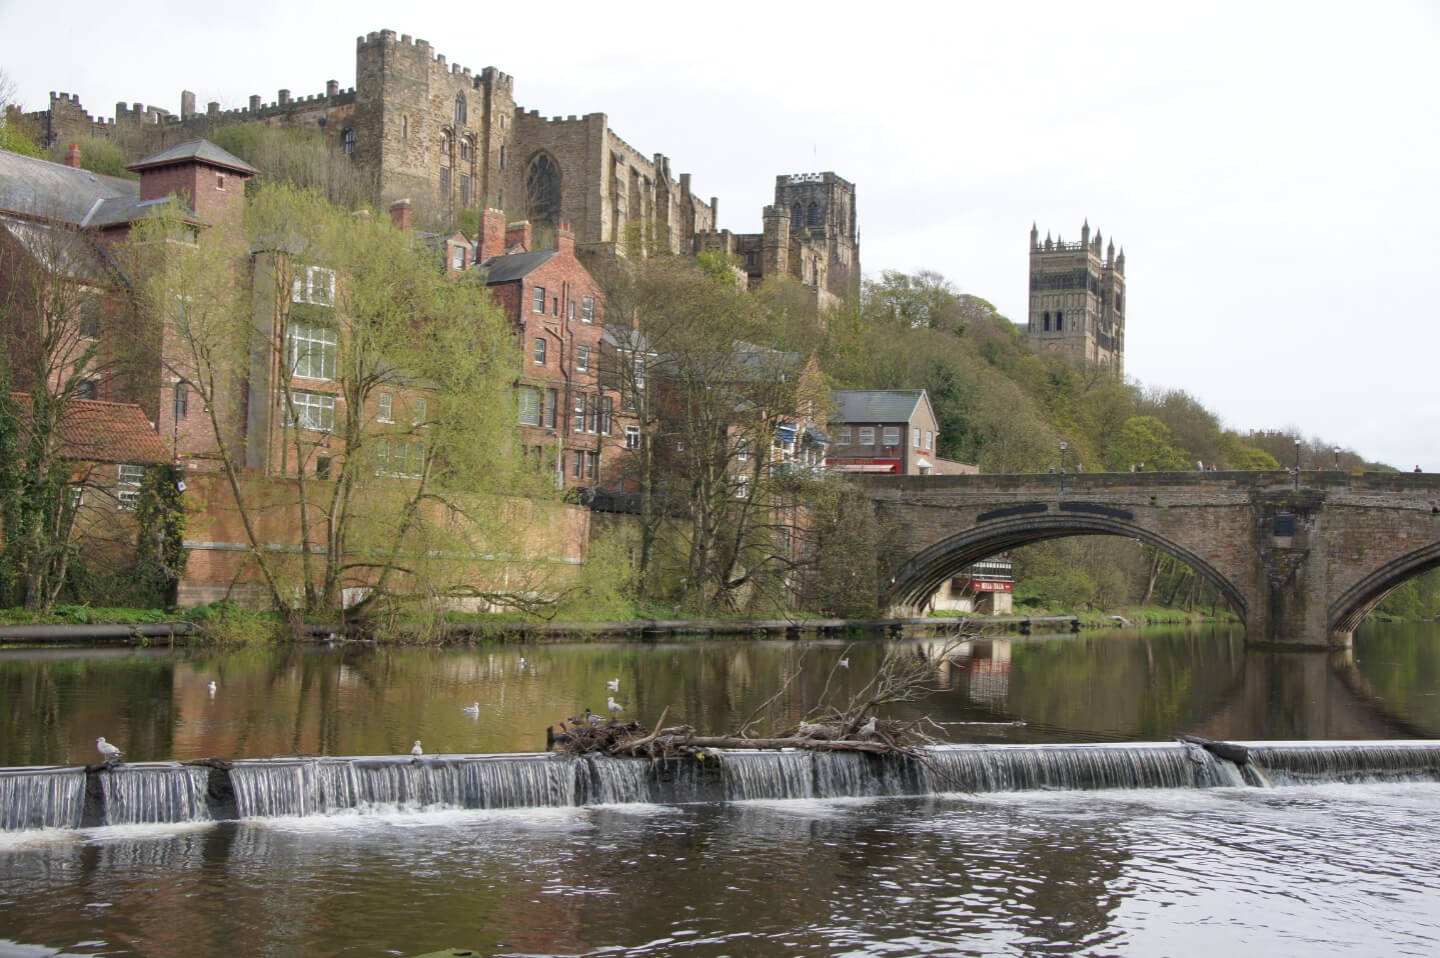 Student Accommodation in Neville's Cross, Durham - Durham Cathedral from across the River Wear